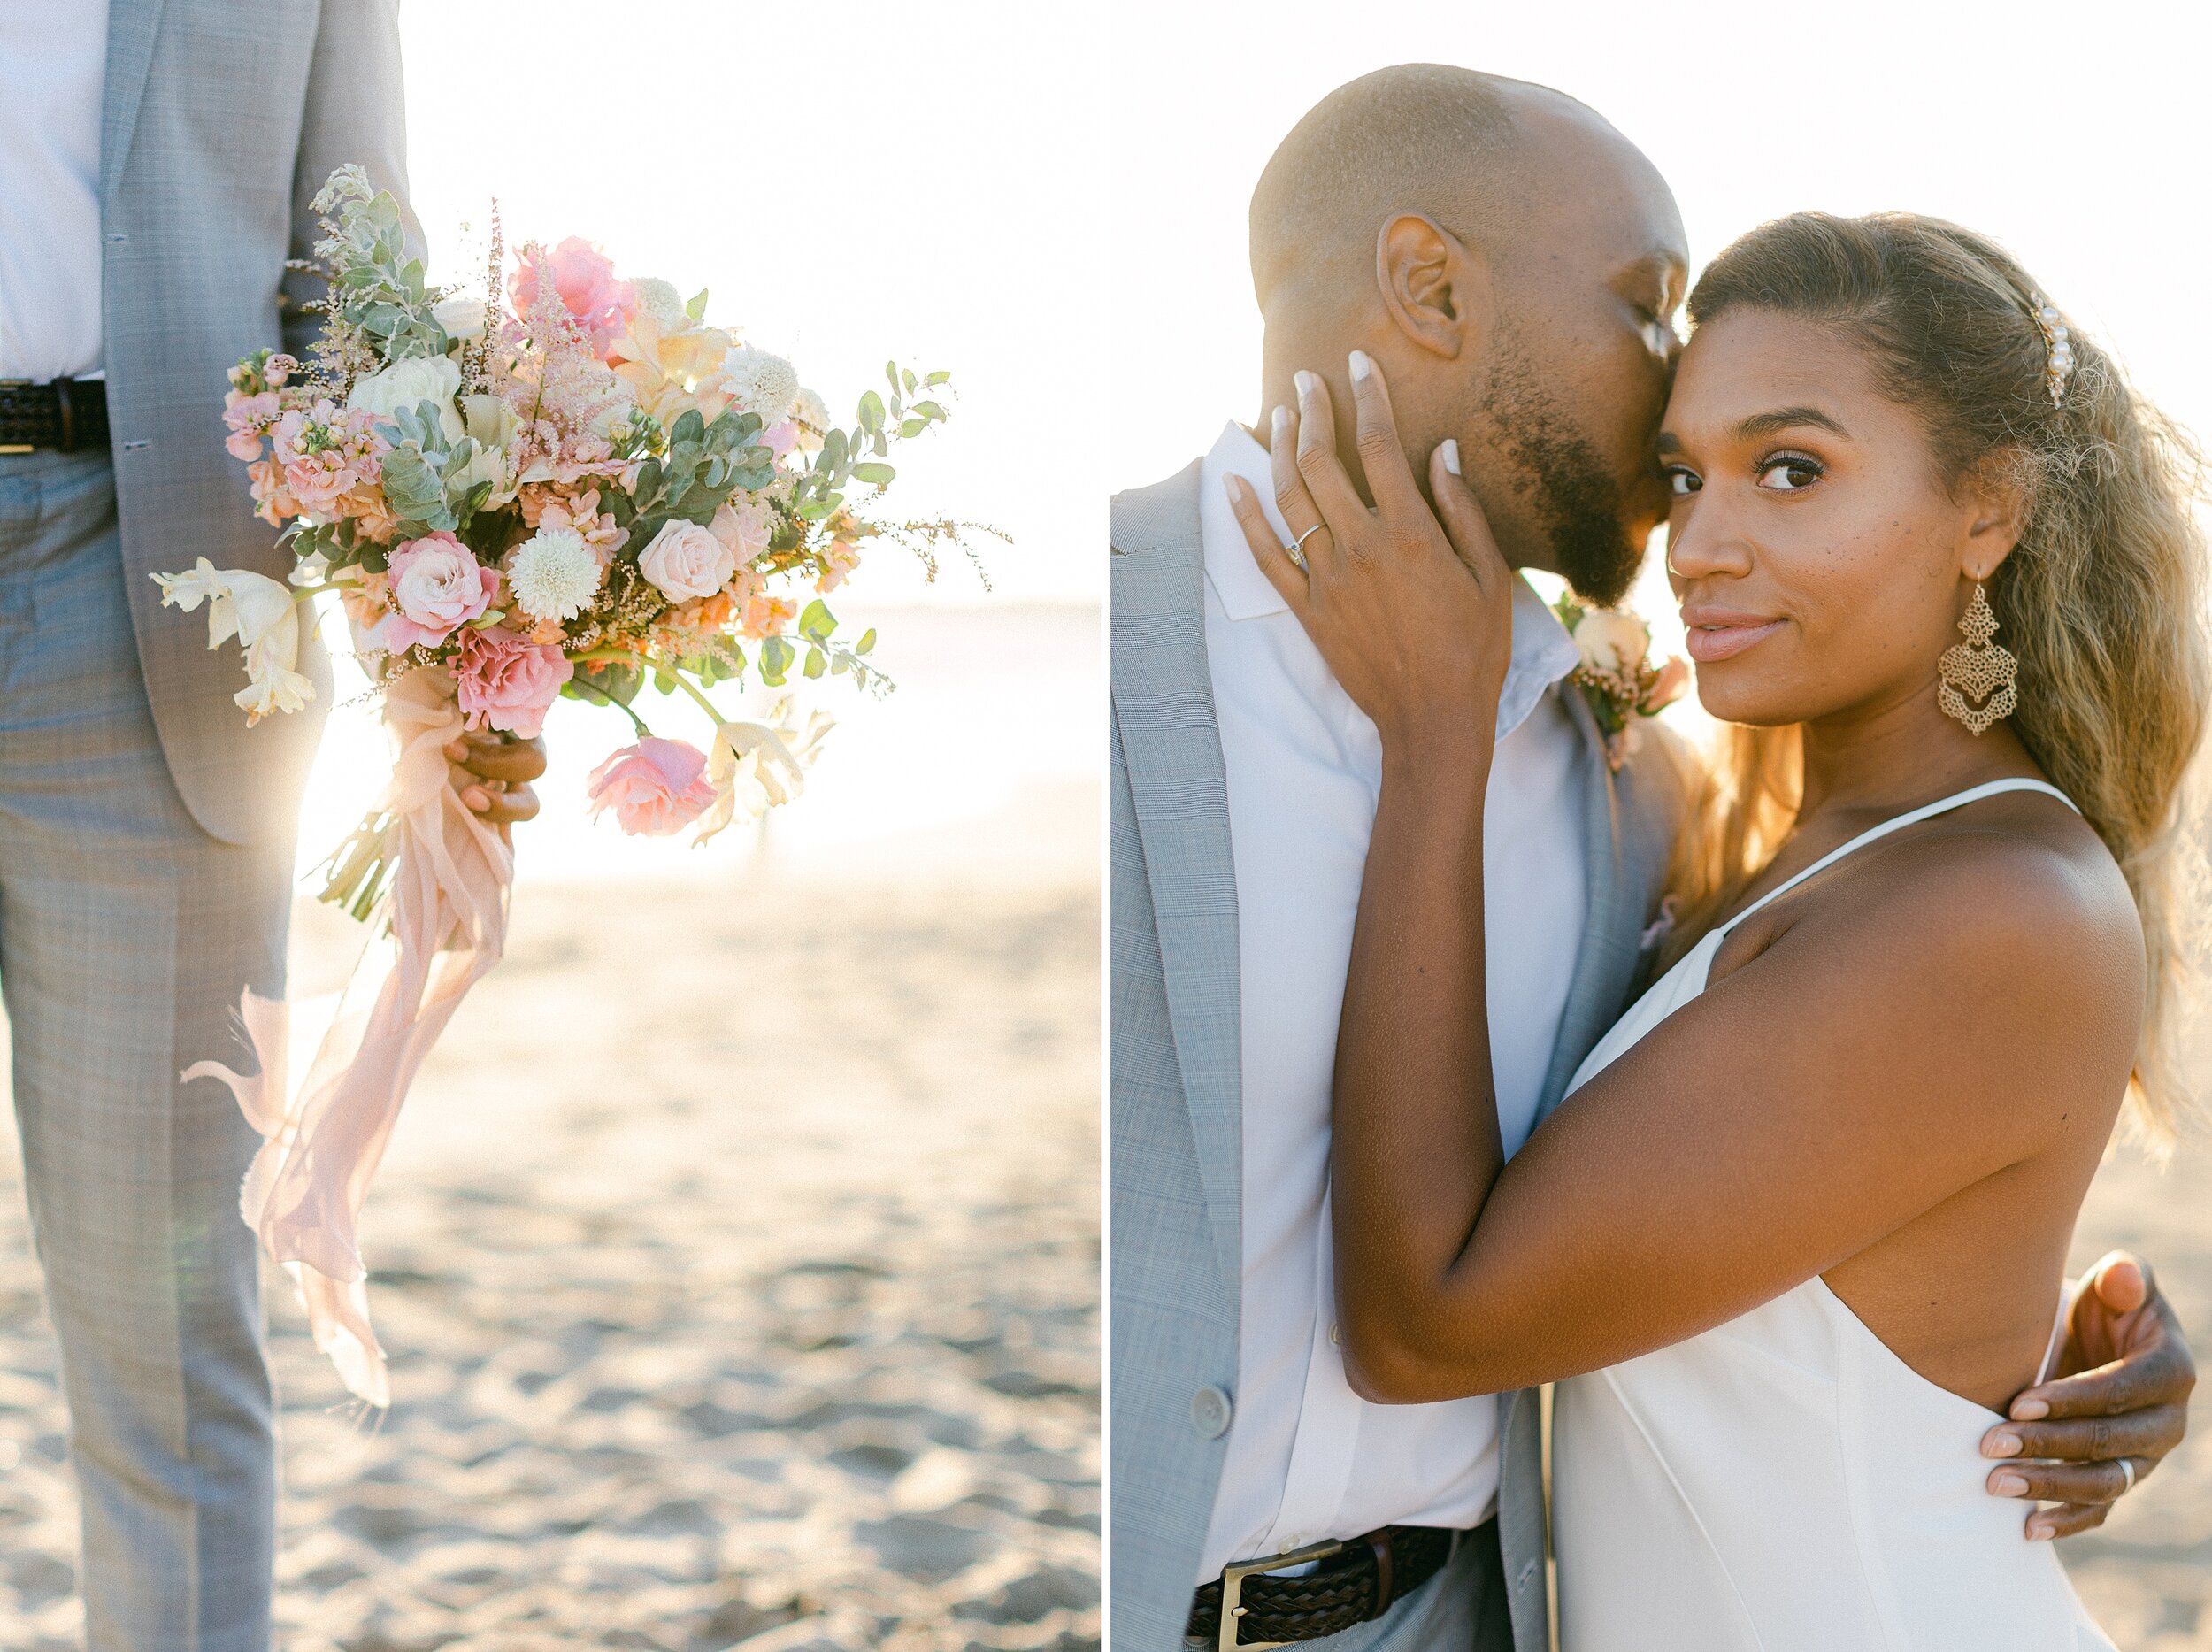 Bride demonstrates how to pose for wedding photos by looking to camera as groom kisses her temple following their Marina Del Rey beach elopement.